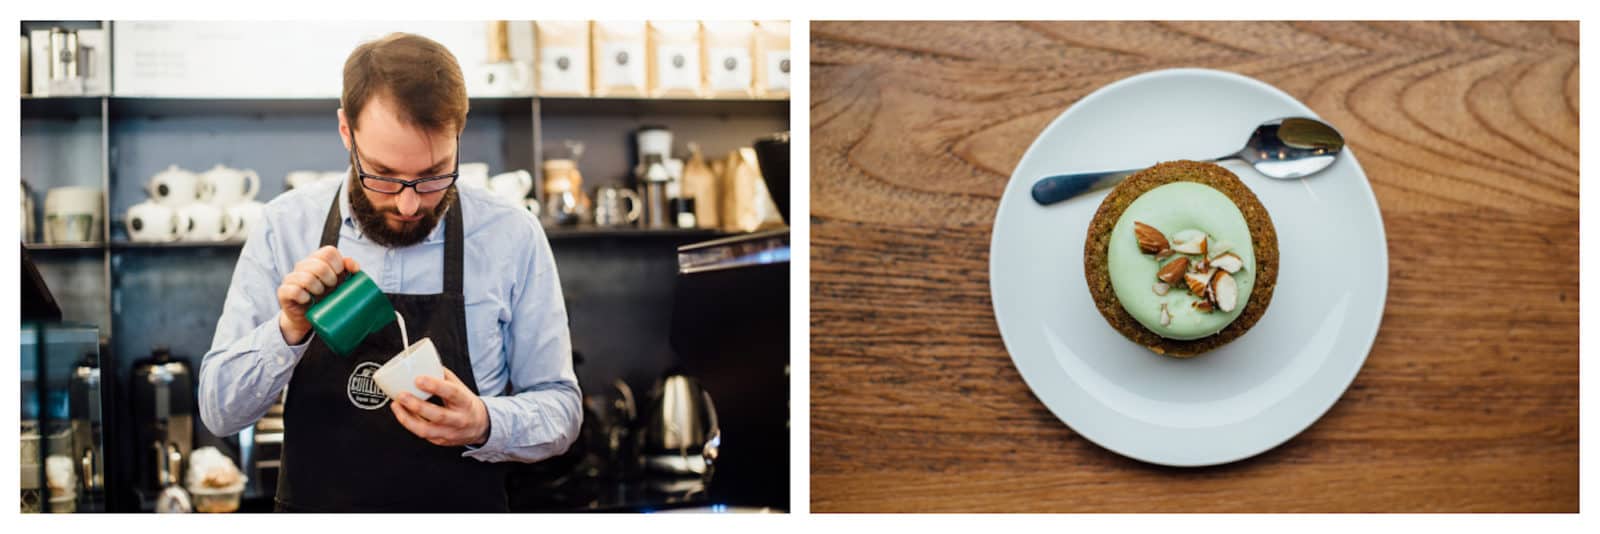 A barista making coffee (left) and a homemade cake with icing at Cuillier coffee shop in Paris' St Germain Neighborhood (right).